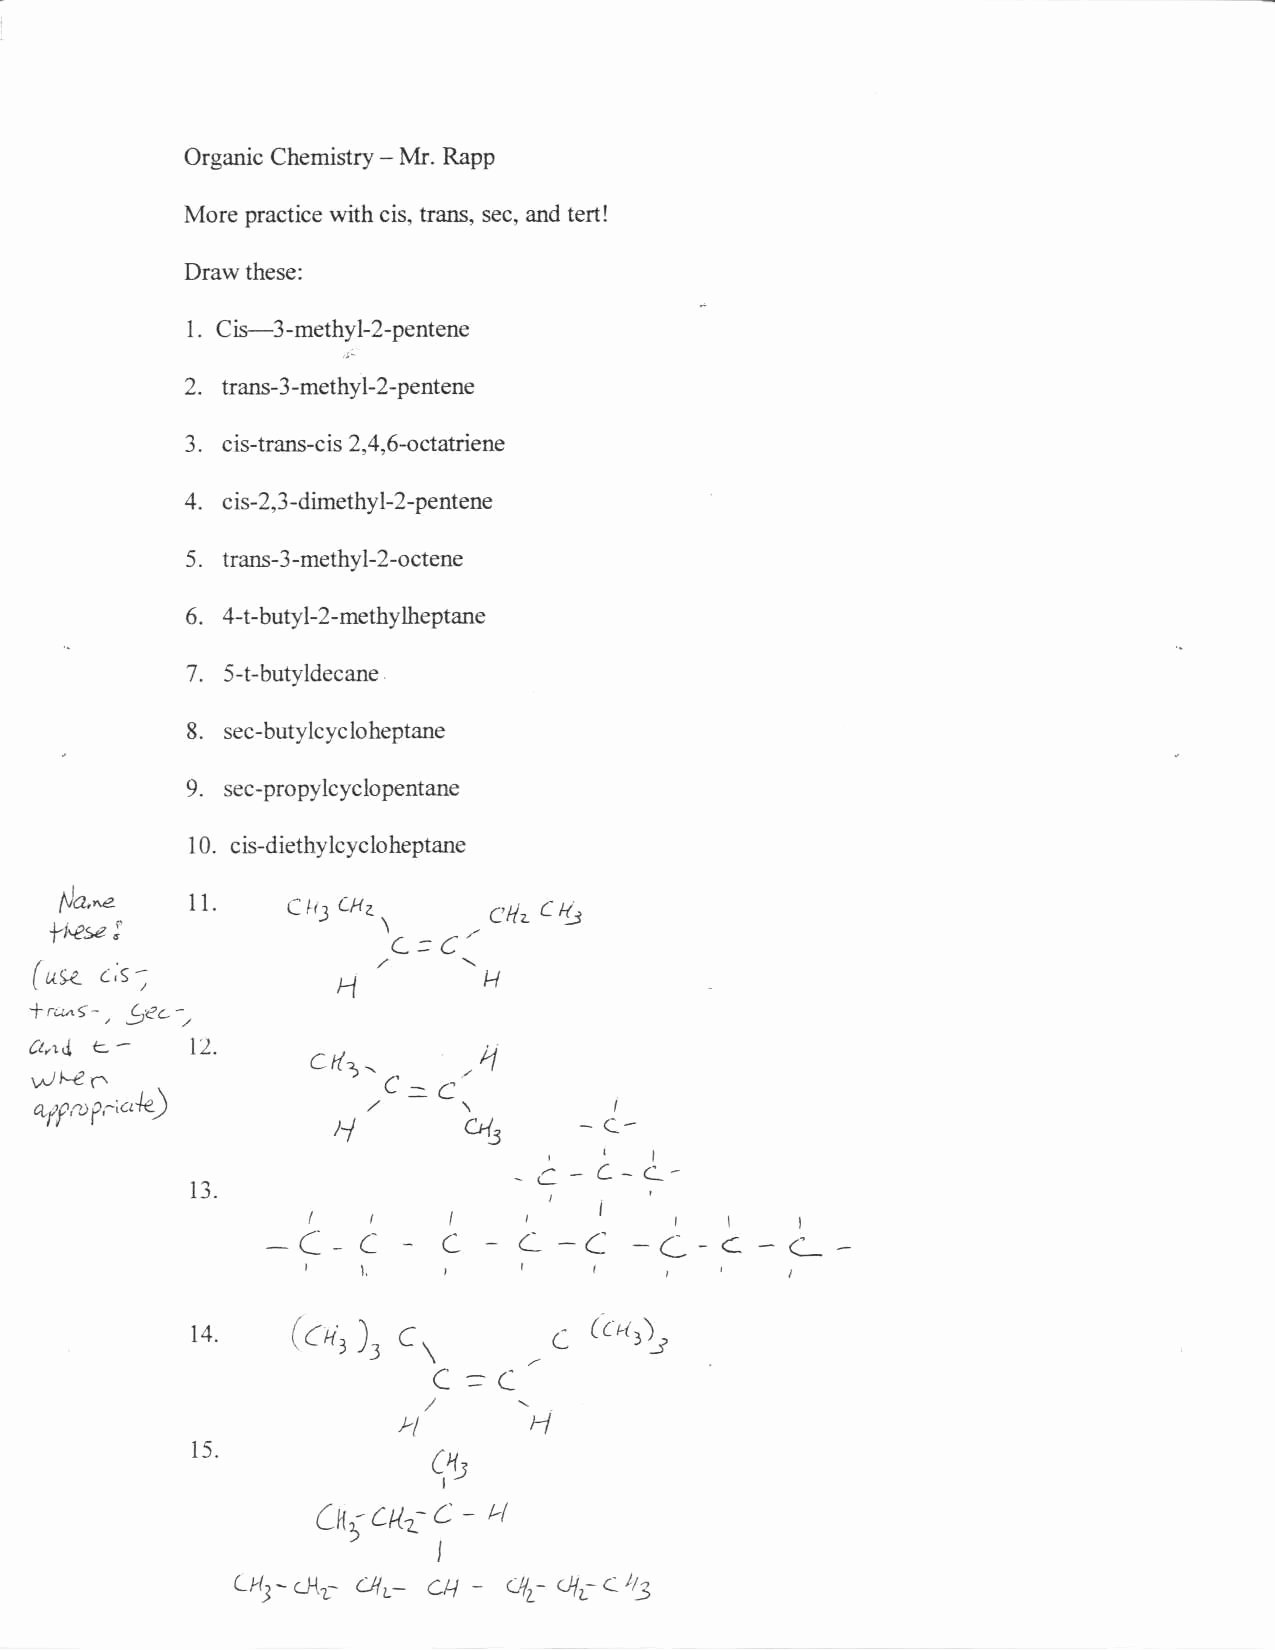 Organic Chemistry Worksheet with Answers Beautiful organic Nomenclature Worksheet and Answers